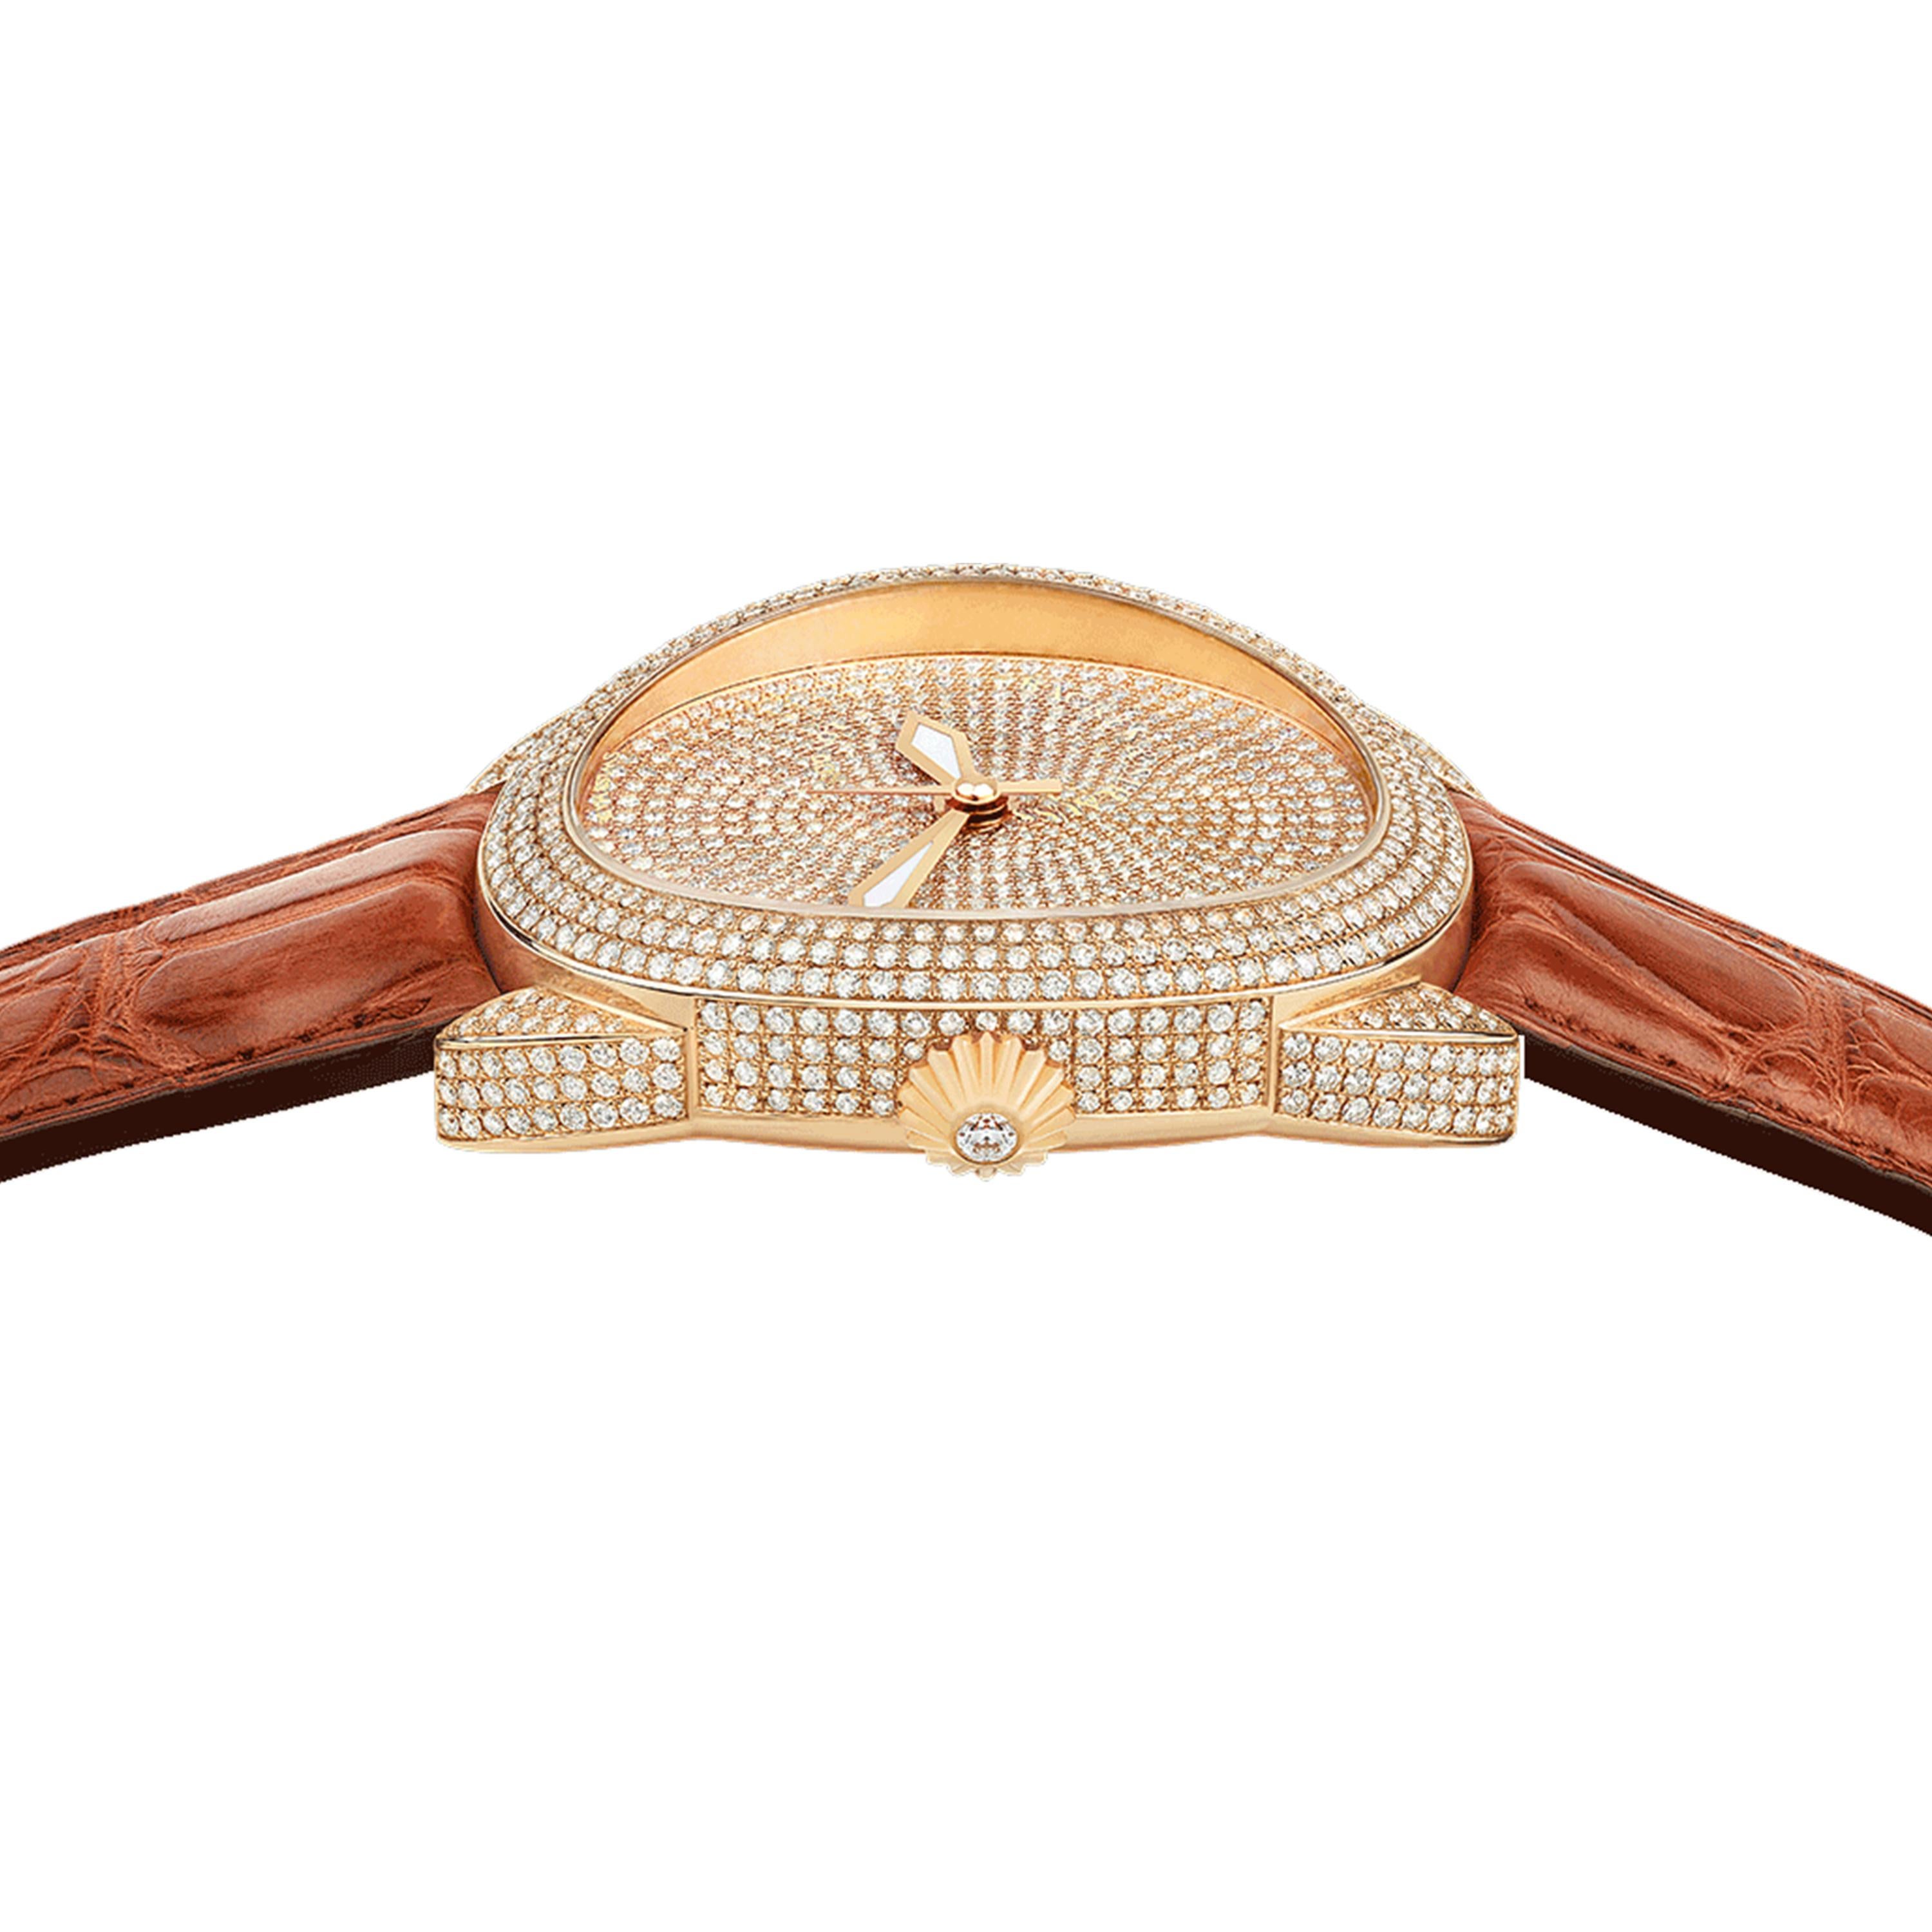 Regent Monarch 4452 is a luxury diamond watch for men and women crafted in 18kt Rose gold, featuring fully set diamond dial, automatic movement. The case, dial and buckle are set with white Ideal Cut diamonds. It is a 44 mm x 52 mm statement watch